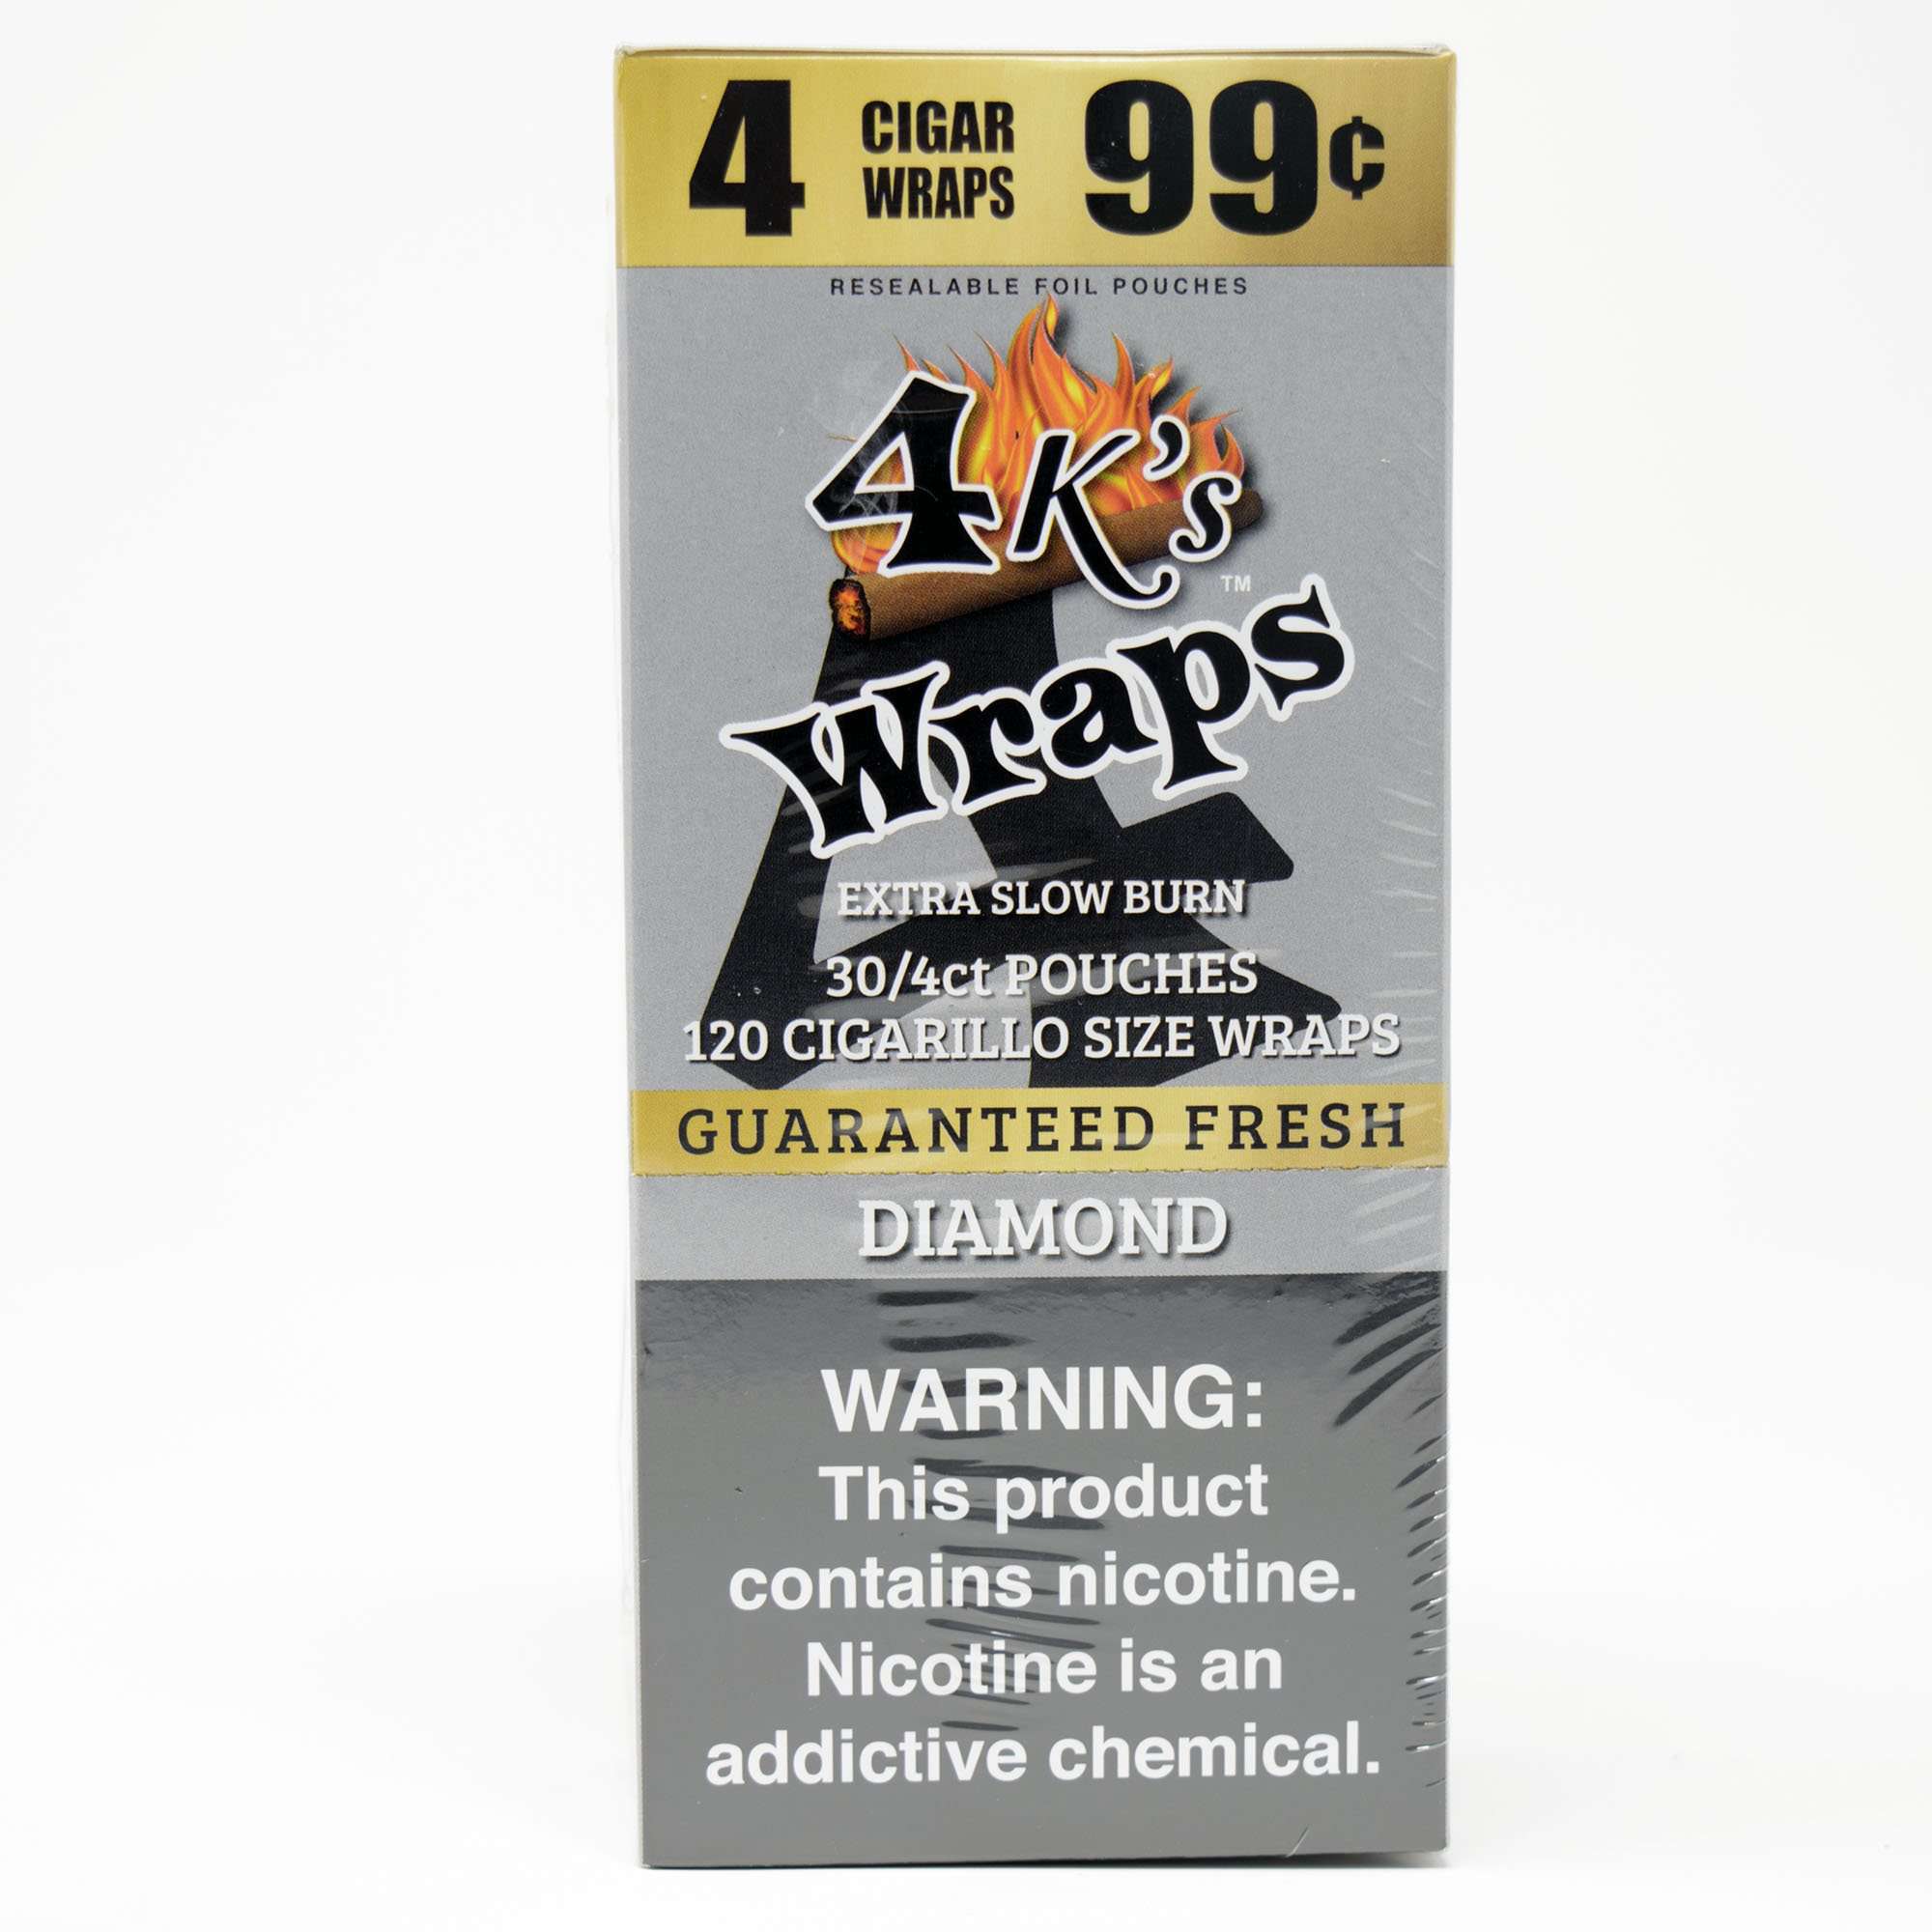 4 KING WRAP 4 for 99 30 Count